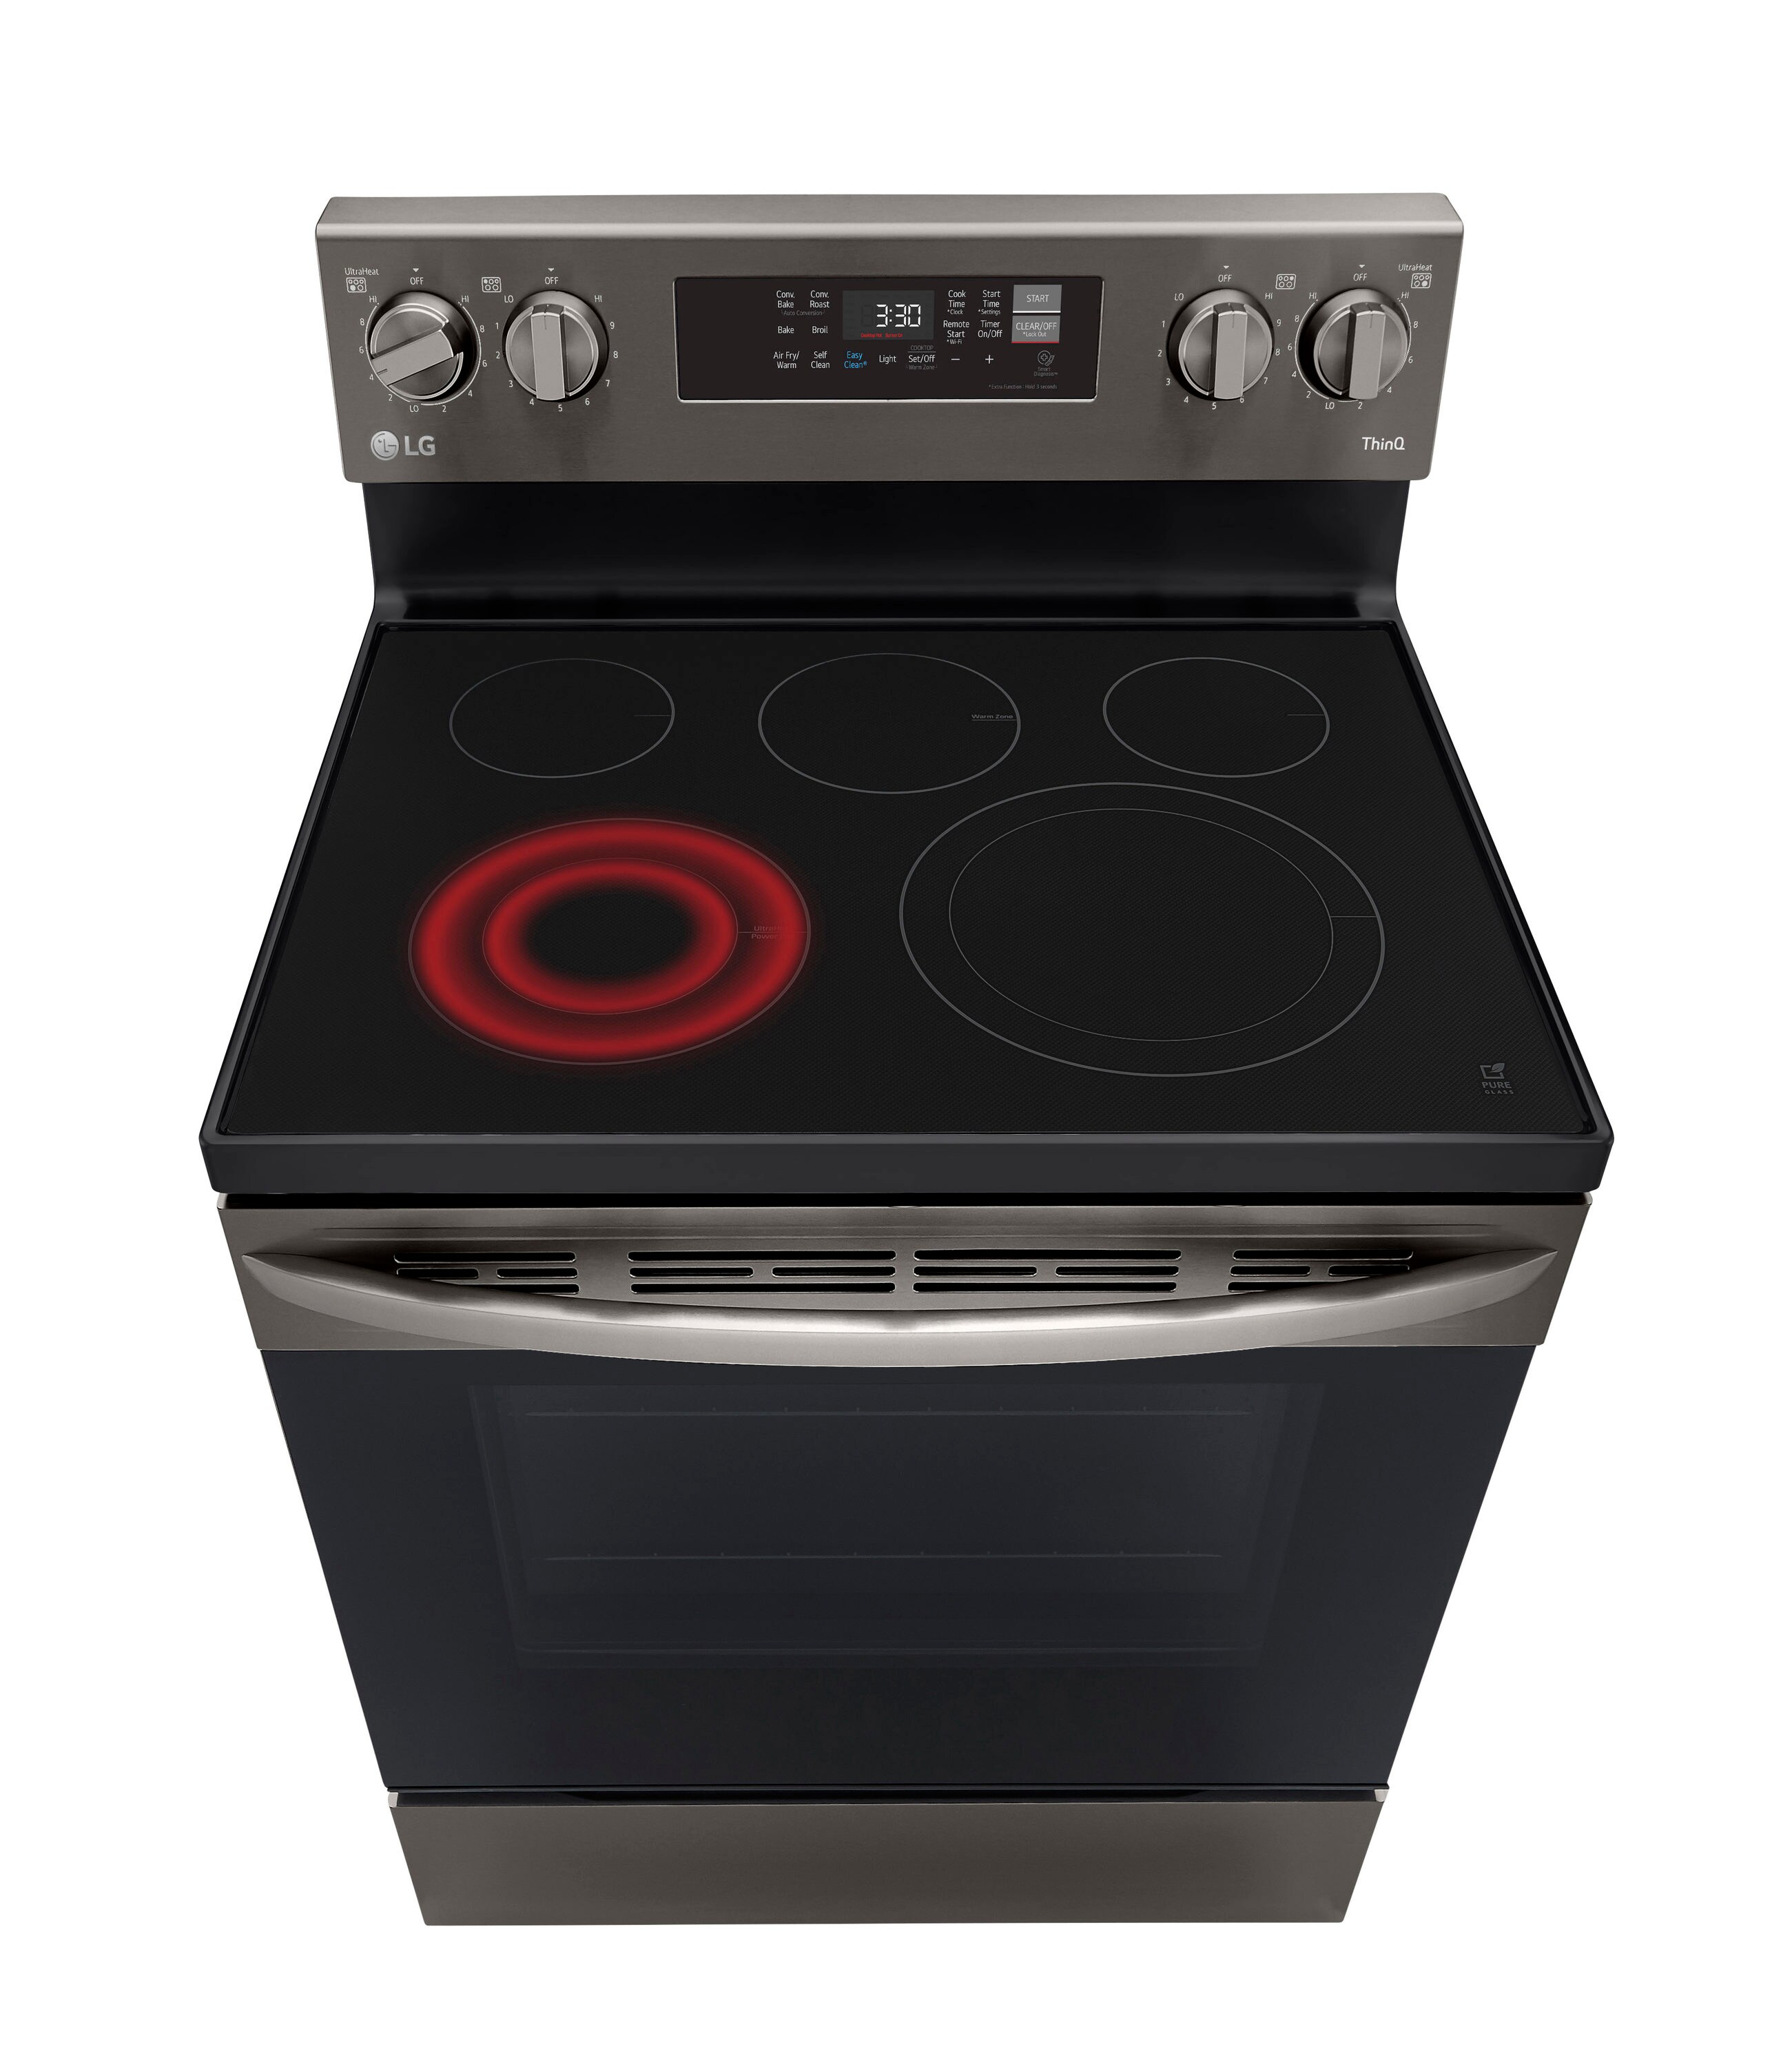 LG 30 in. 6.3 cu. ft. Smart Wi-Fi Enabled Fan Convection Electric Range Oven  with AirFry and EasyClean in. Stainless Steel LREL6323S - The Home Depot